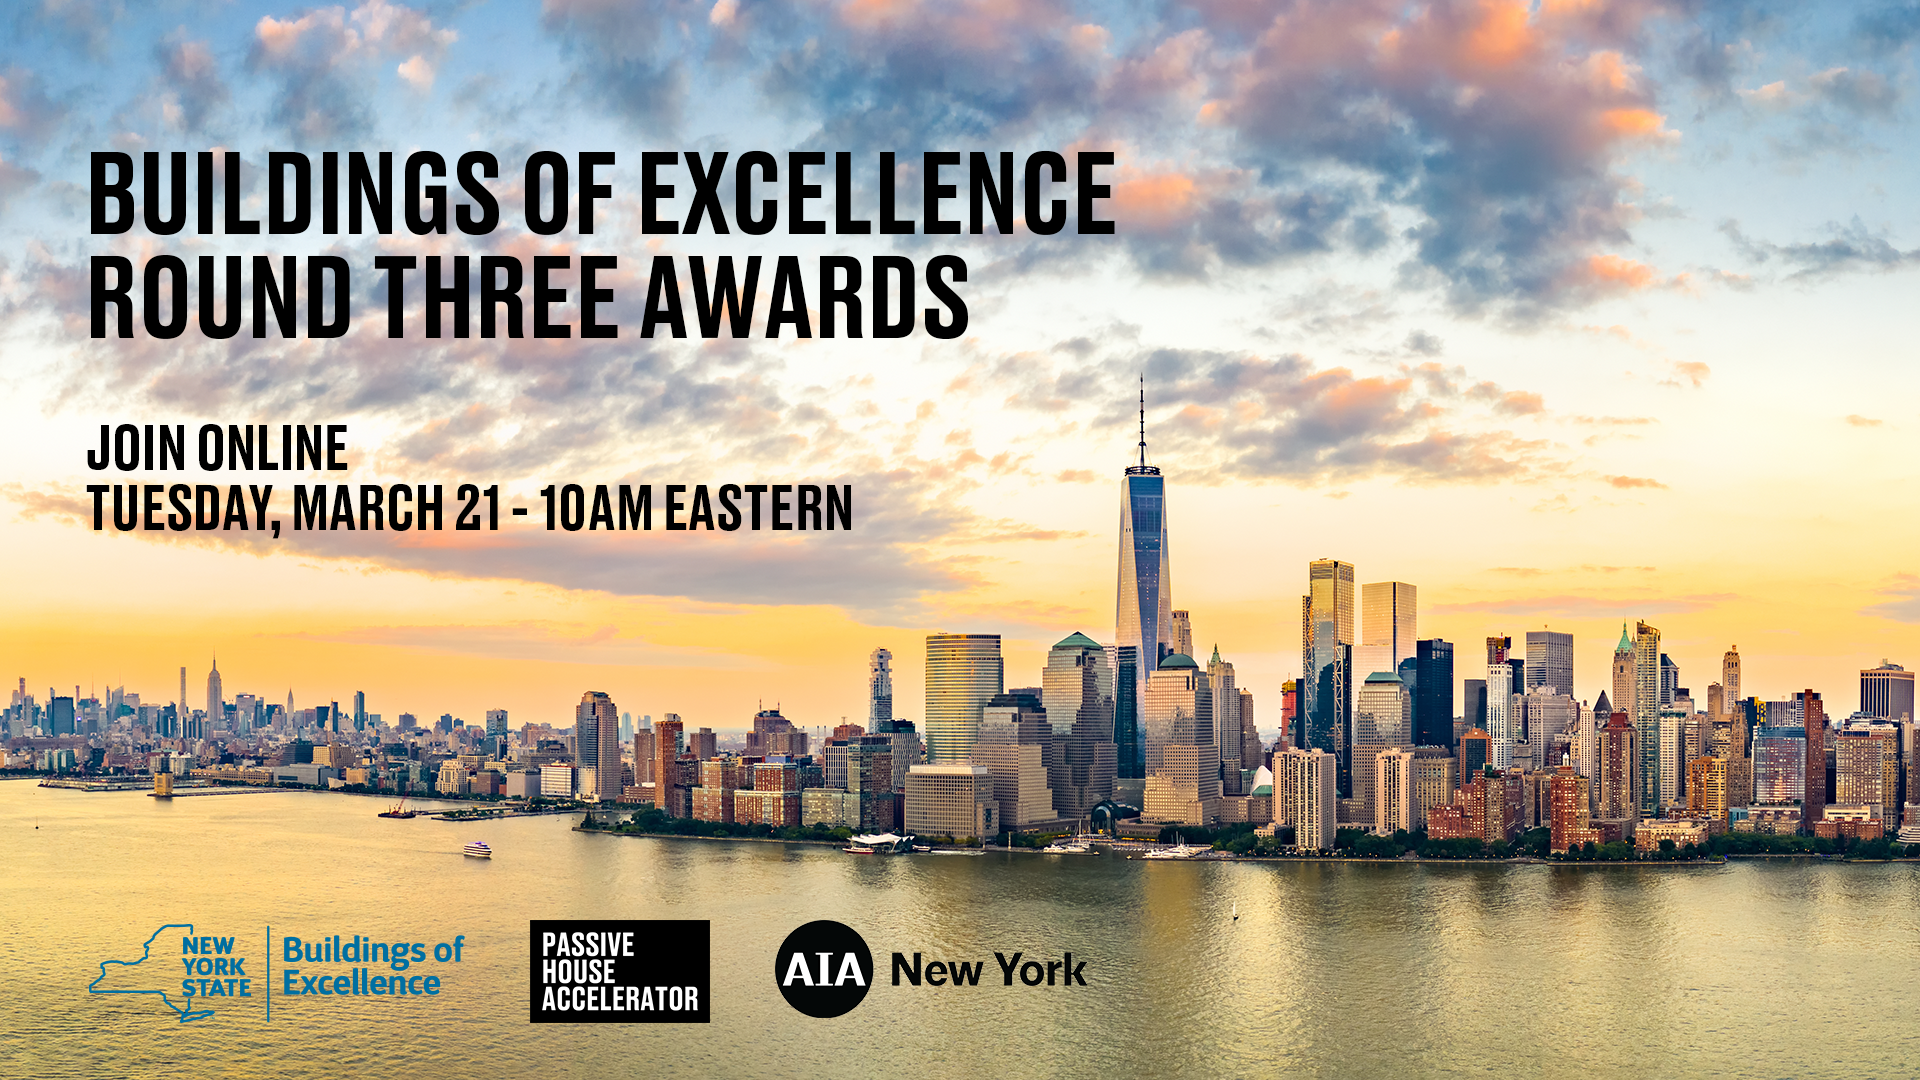 Buildings of Excellence Announcement + Onsite Presentation at AIA New York